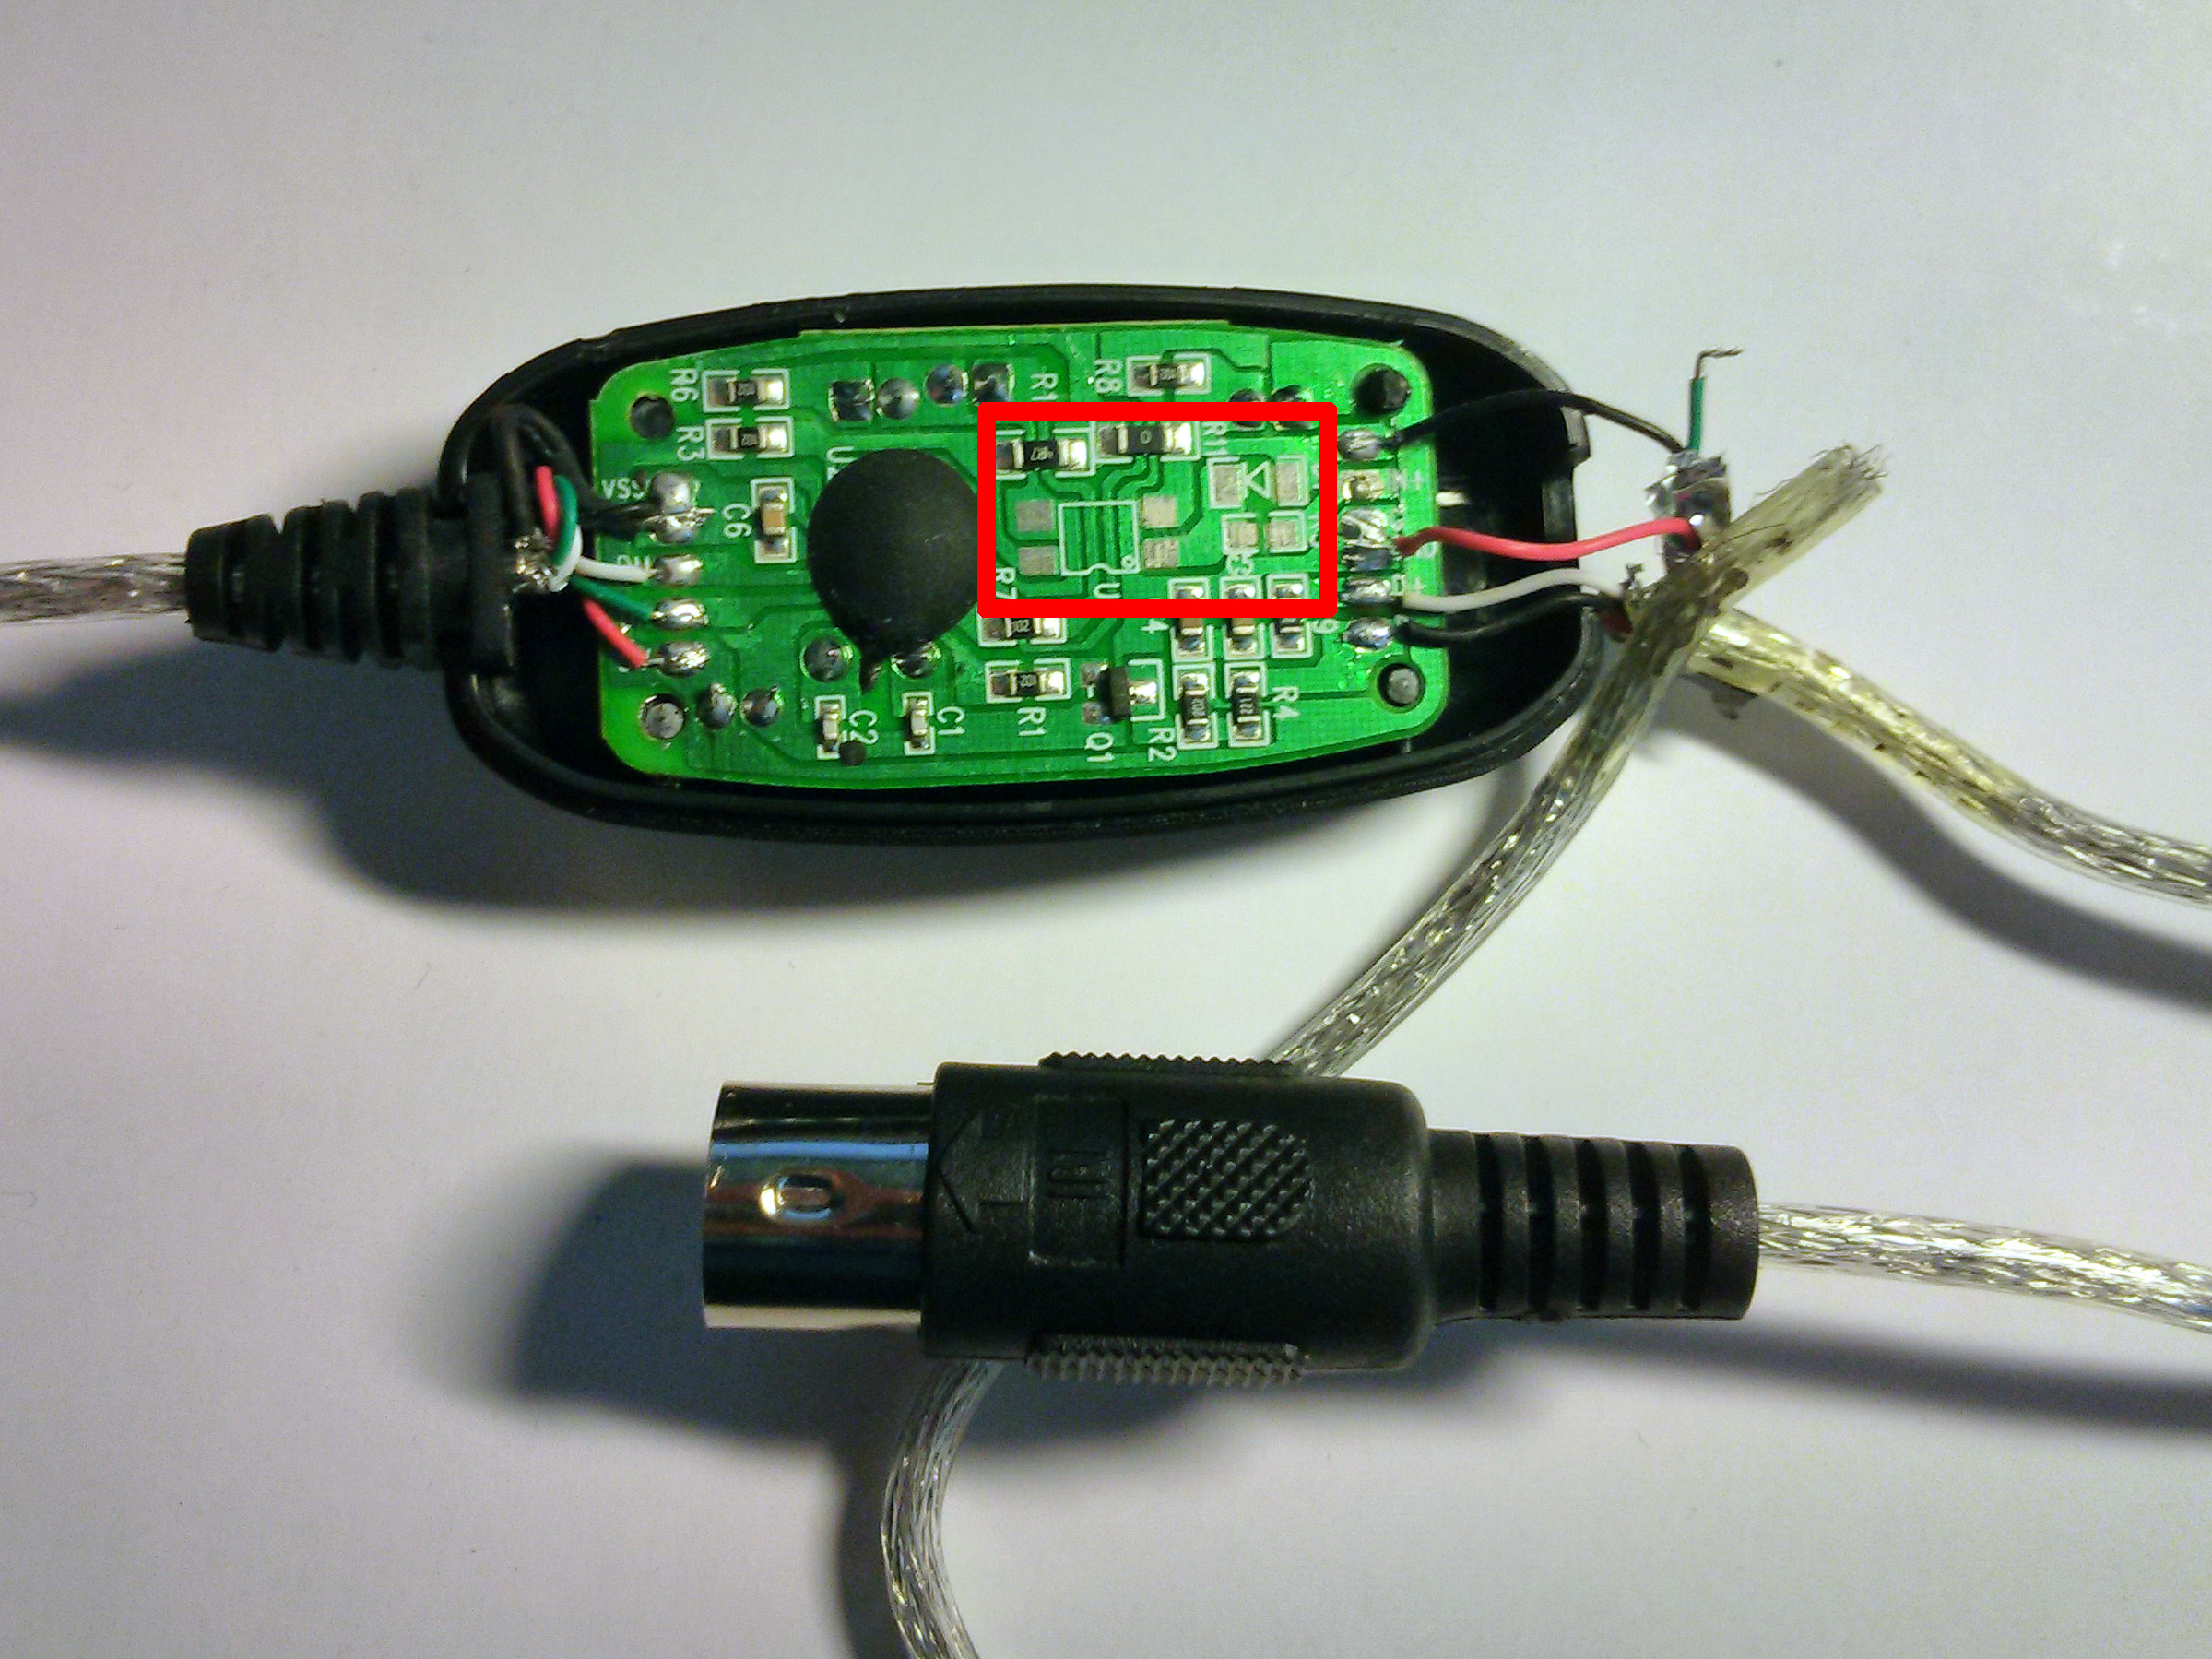 Cheap USB MIDI cable: self assembly may be required – arvydas.co.uk